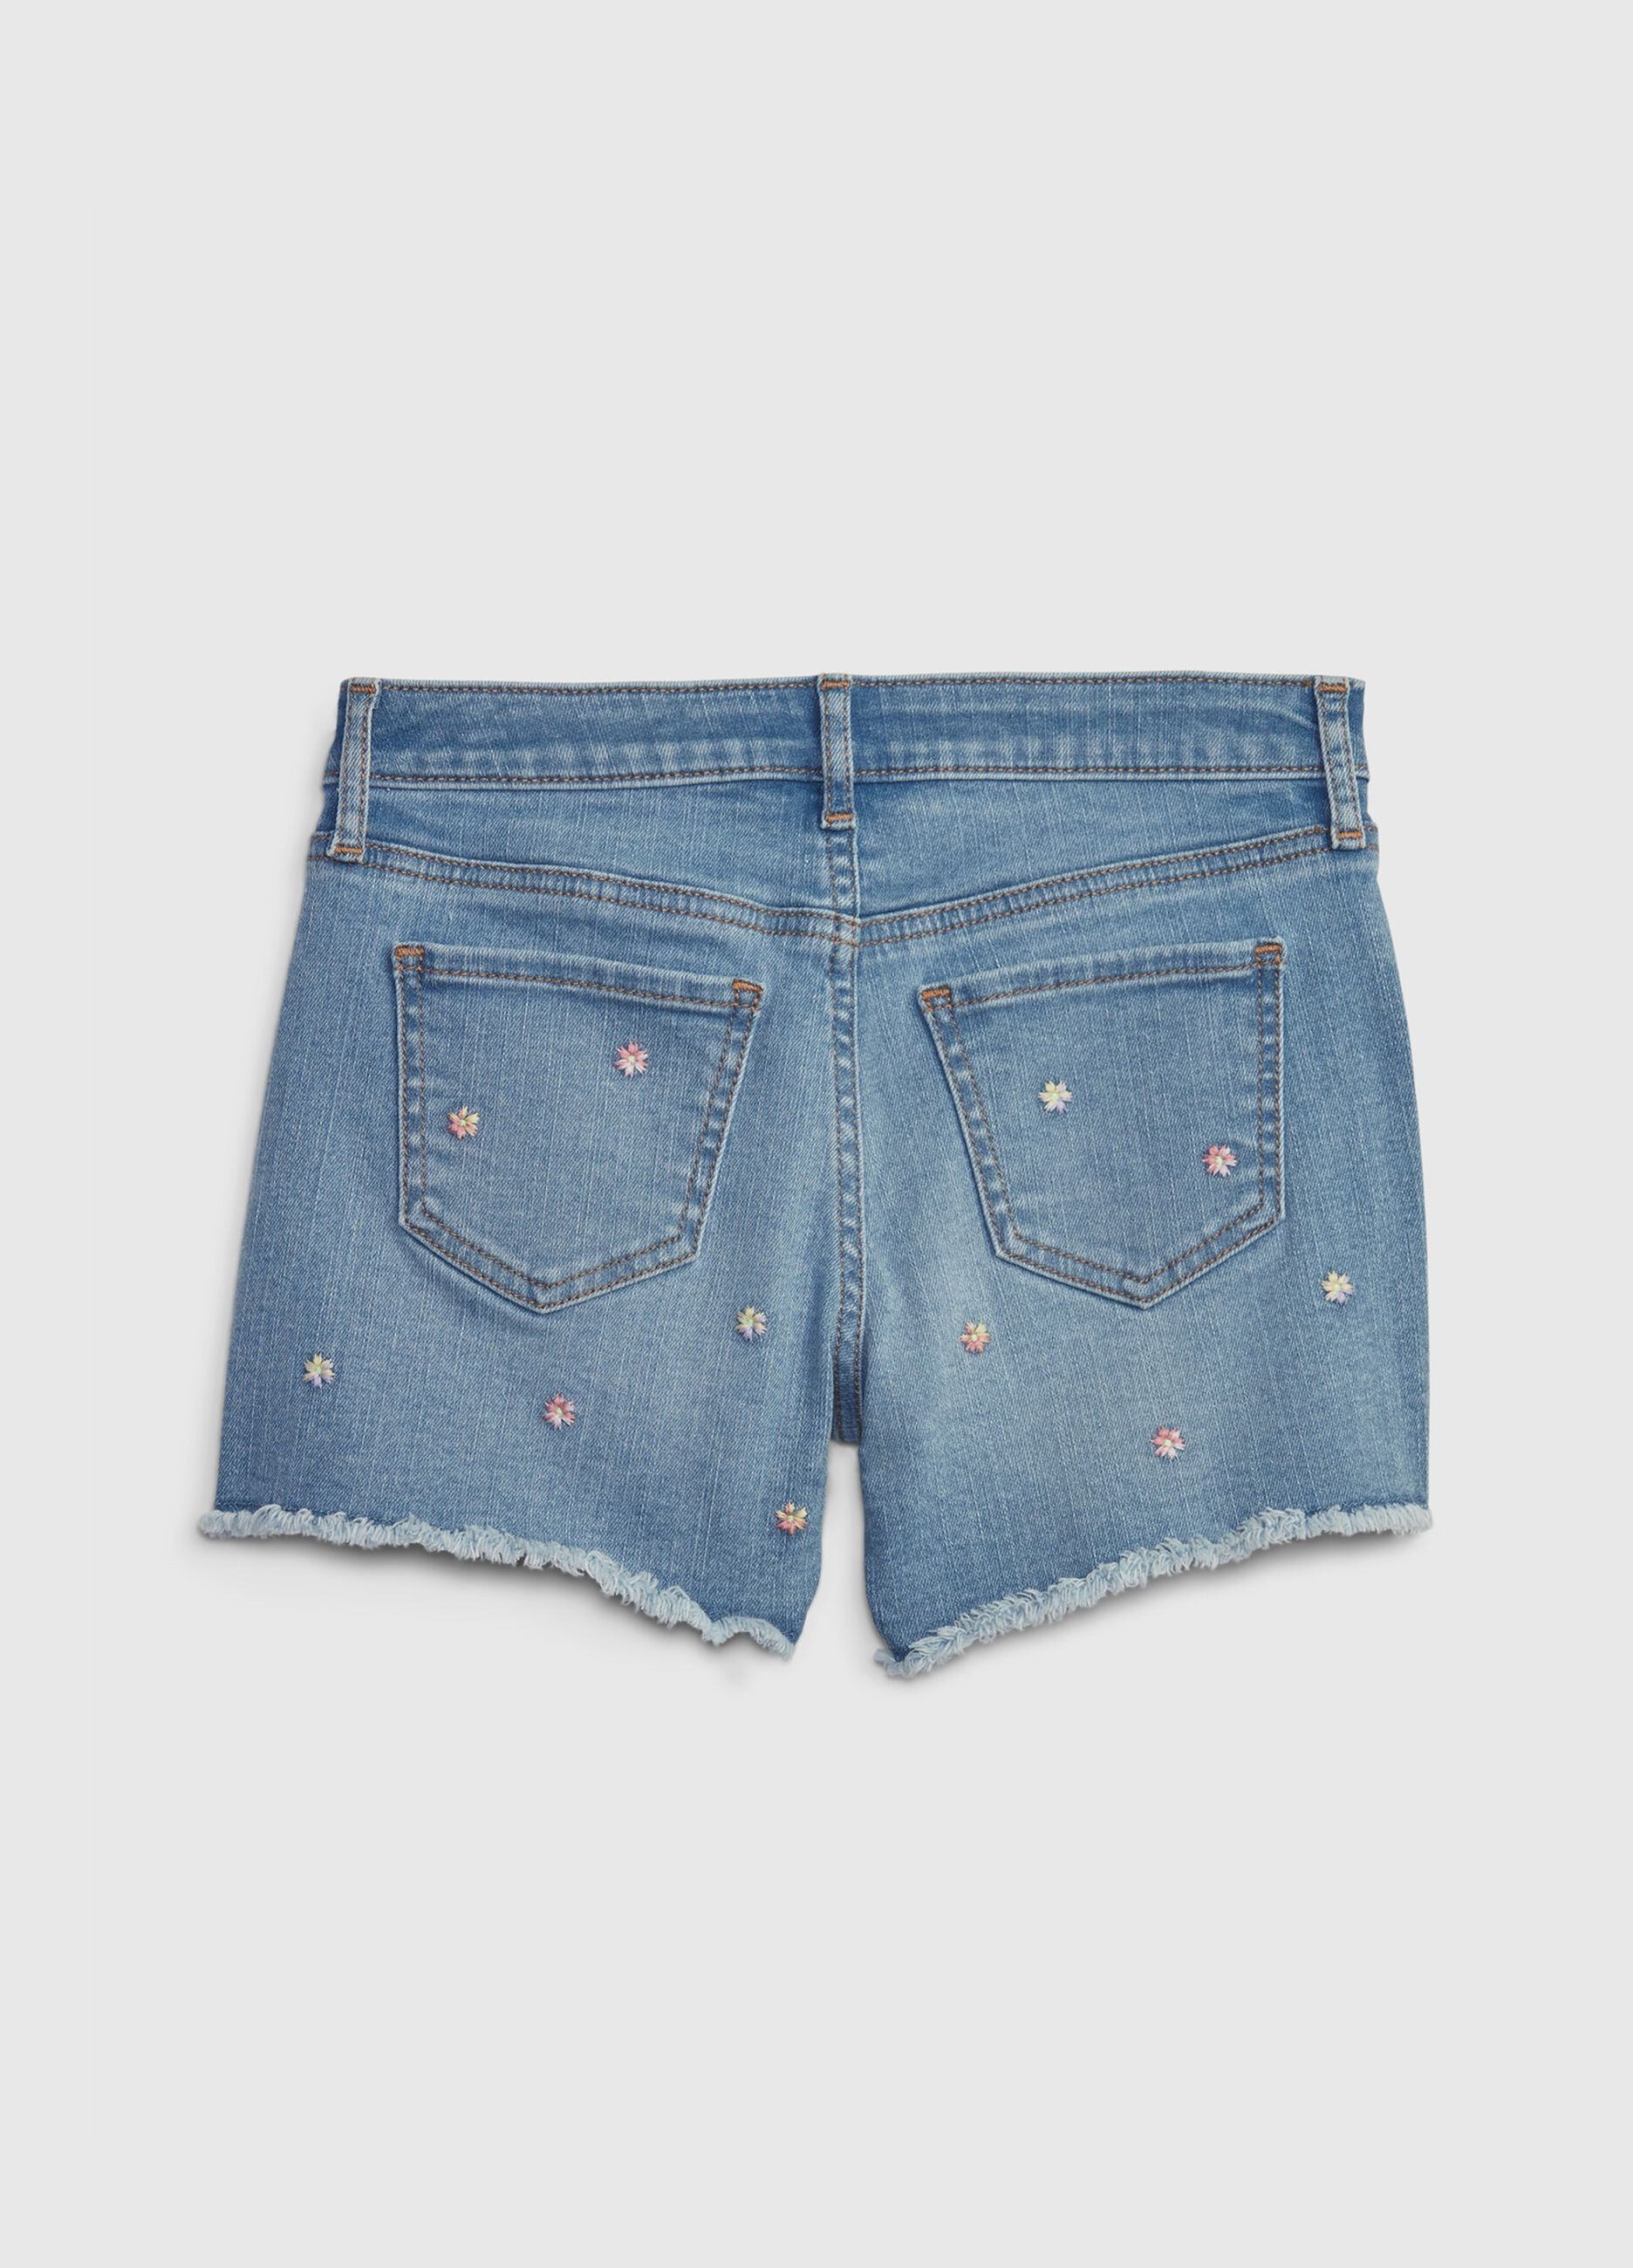 Denim shorts with flower embroidery